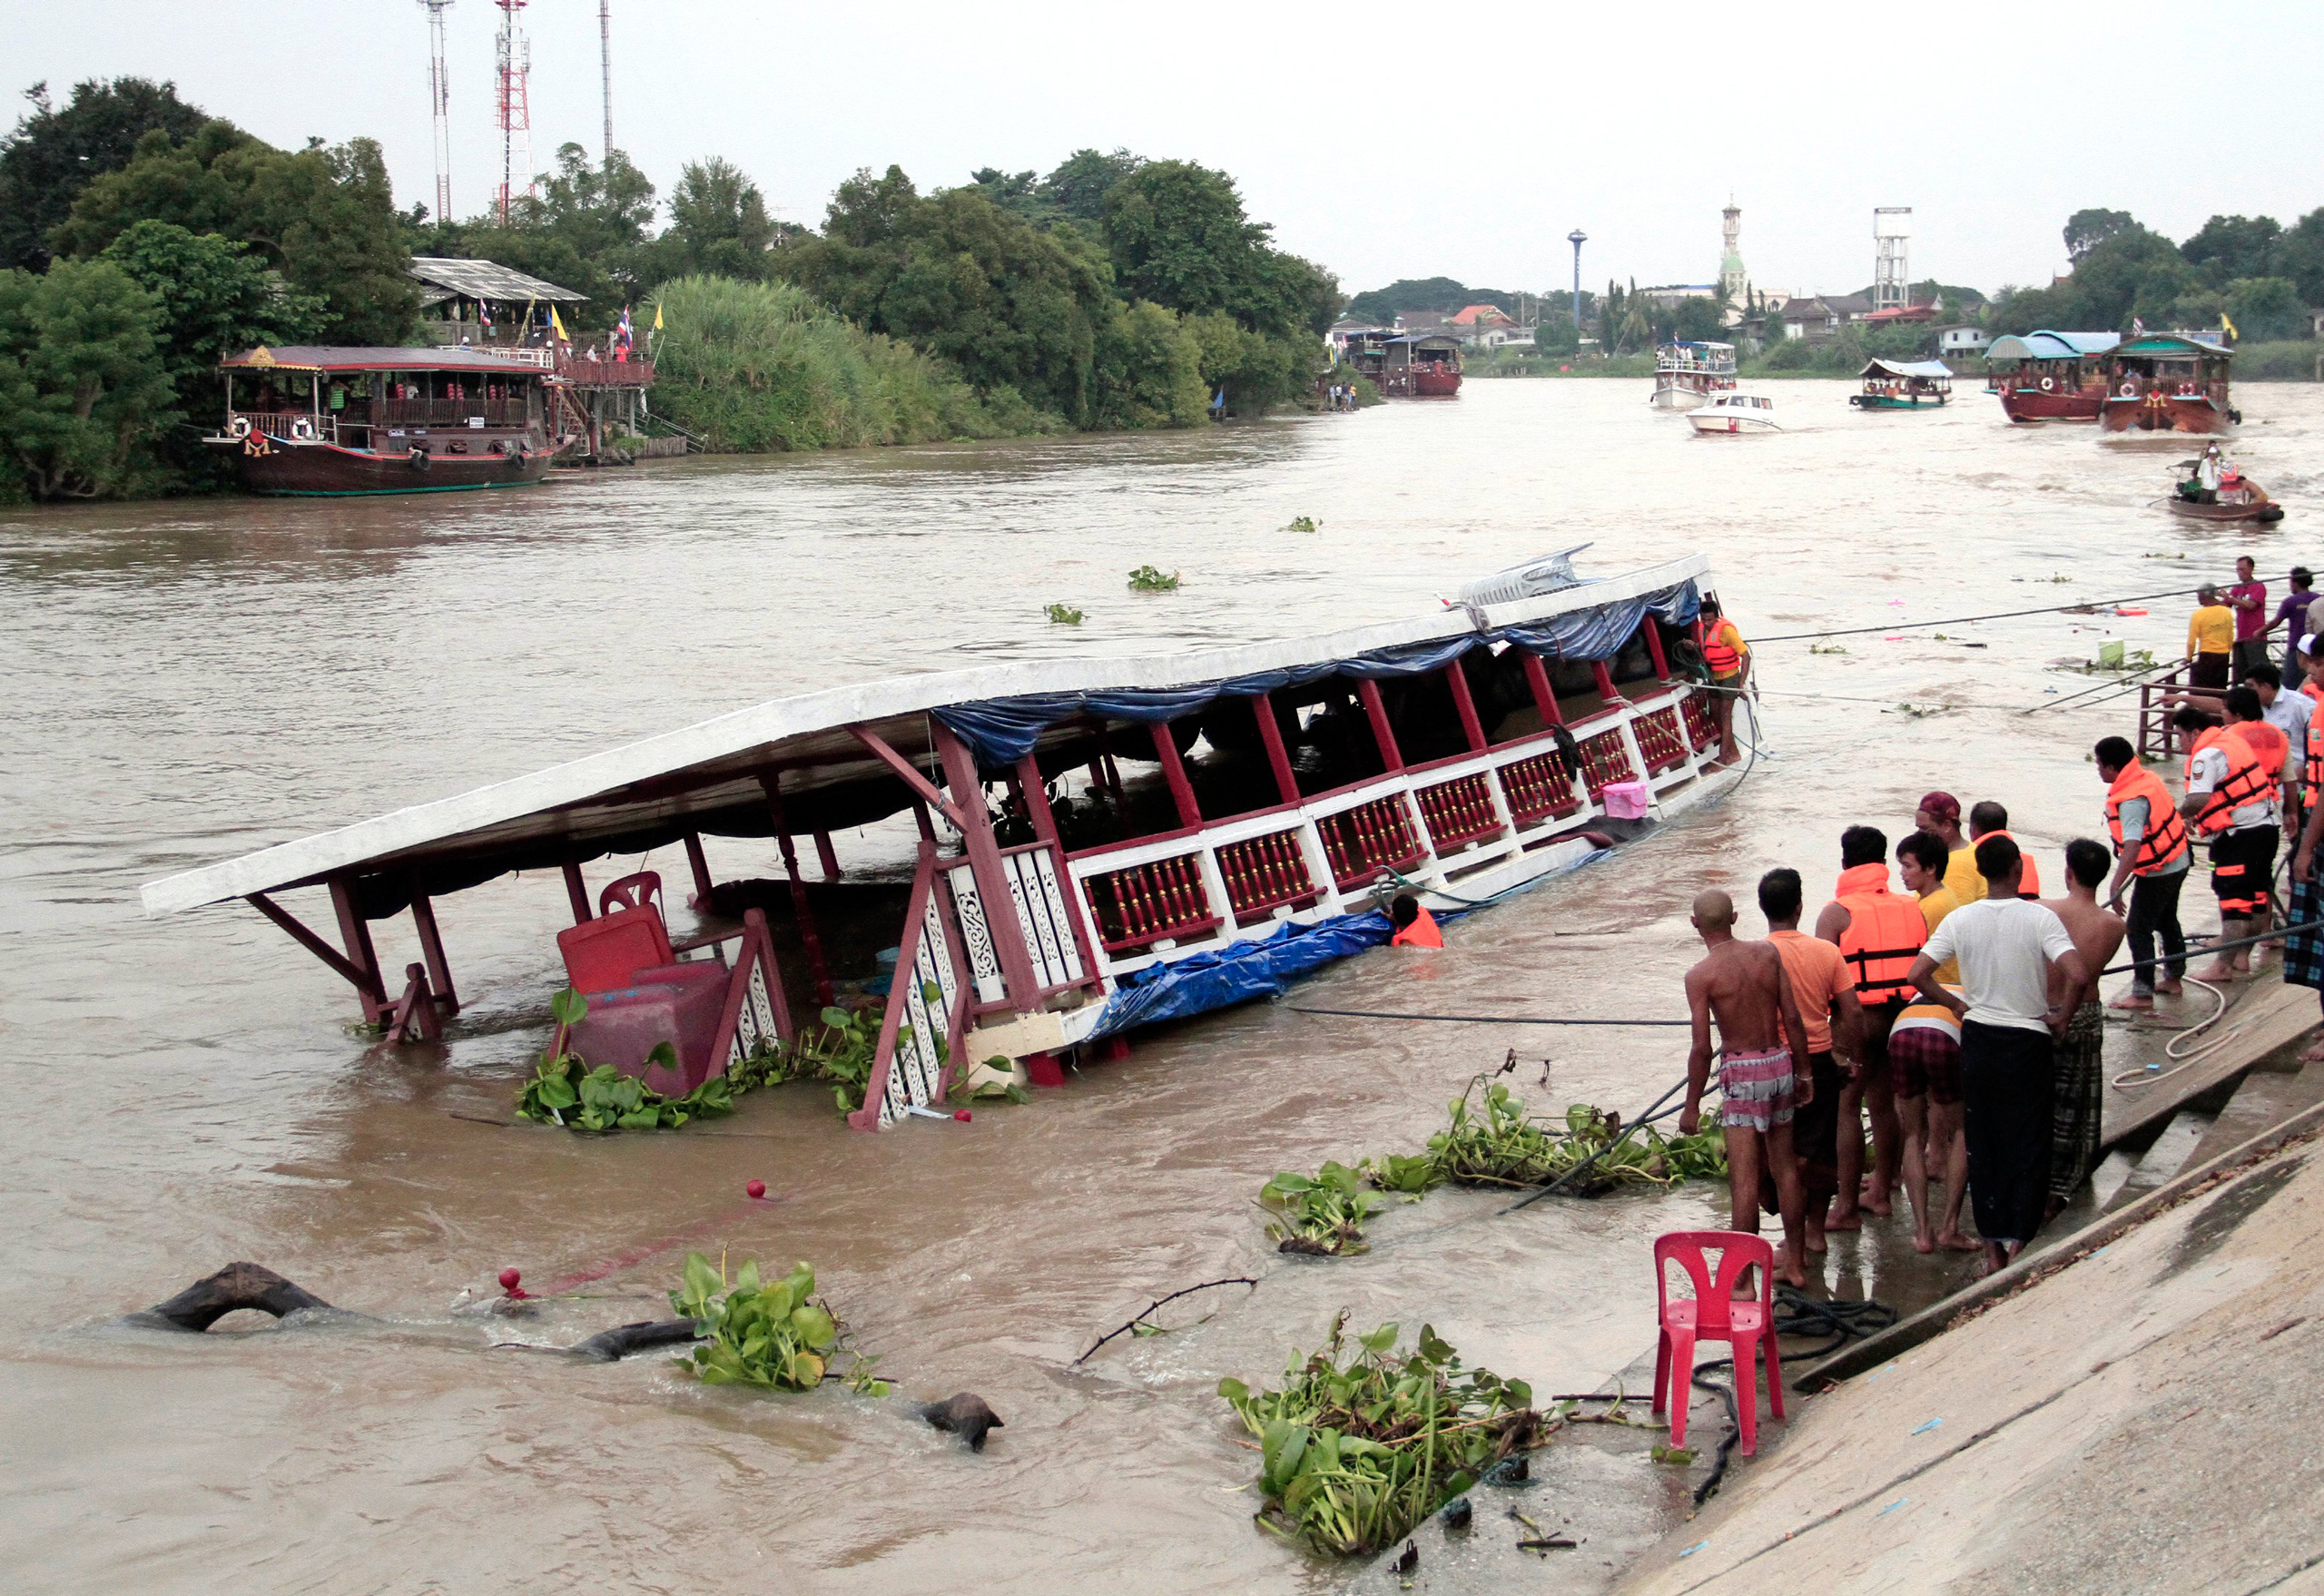 Thai news reports say at least 13 people were killed when a double-decker passenger boat carrying more than 100 people capsized in the Chao Phraya River north of Bangkok in Thailand on Sept. 18, 2016. (Dailynews/AP)